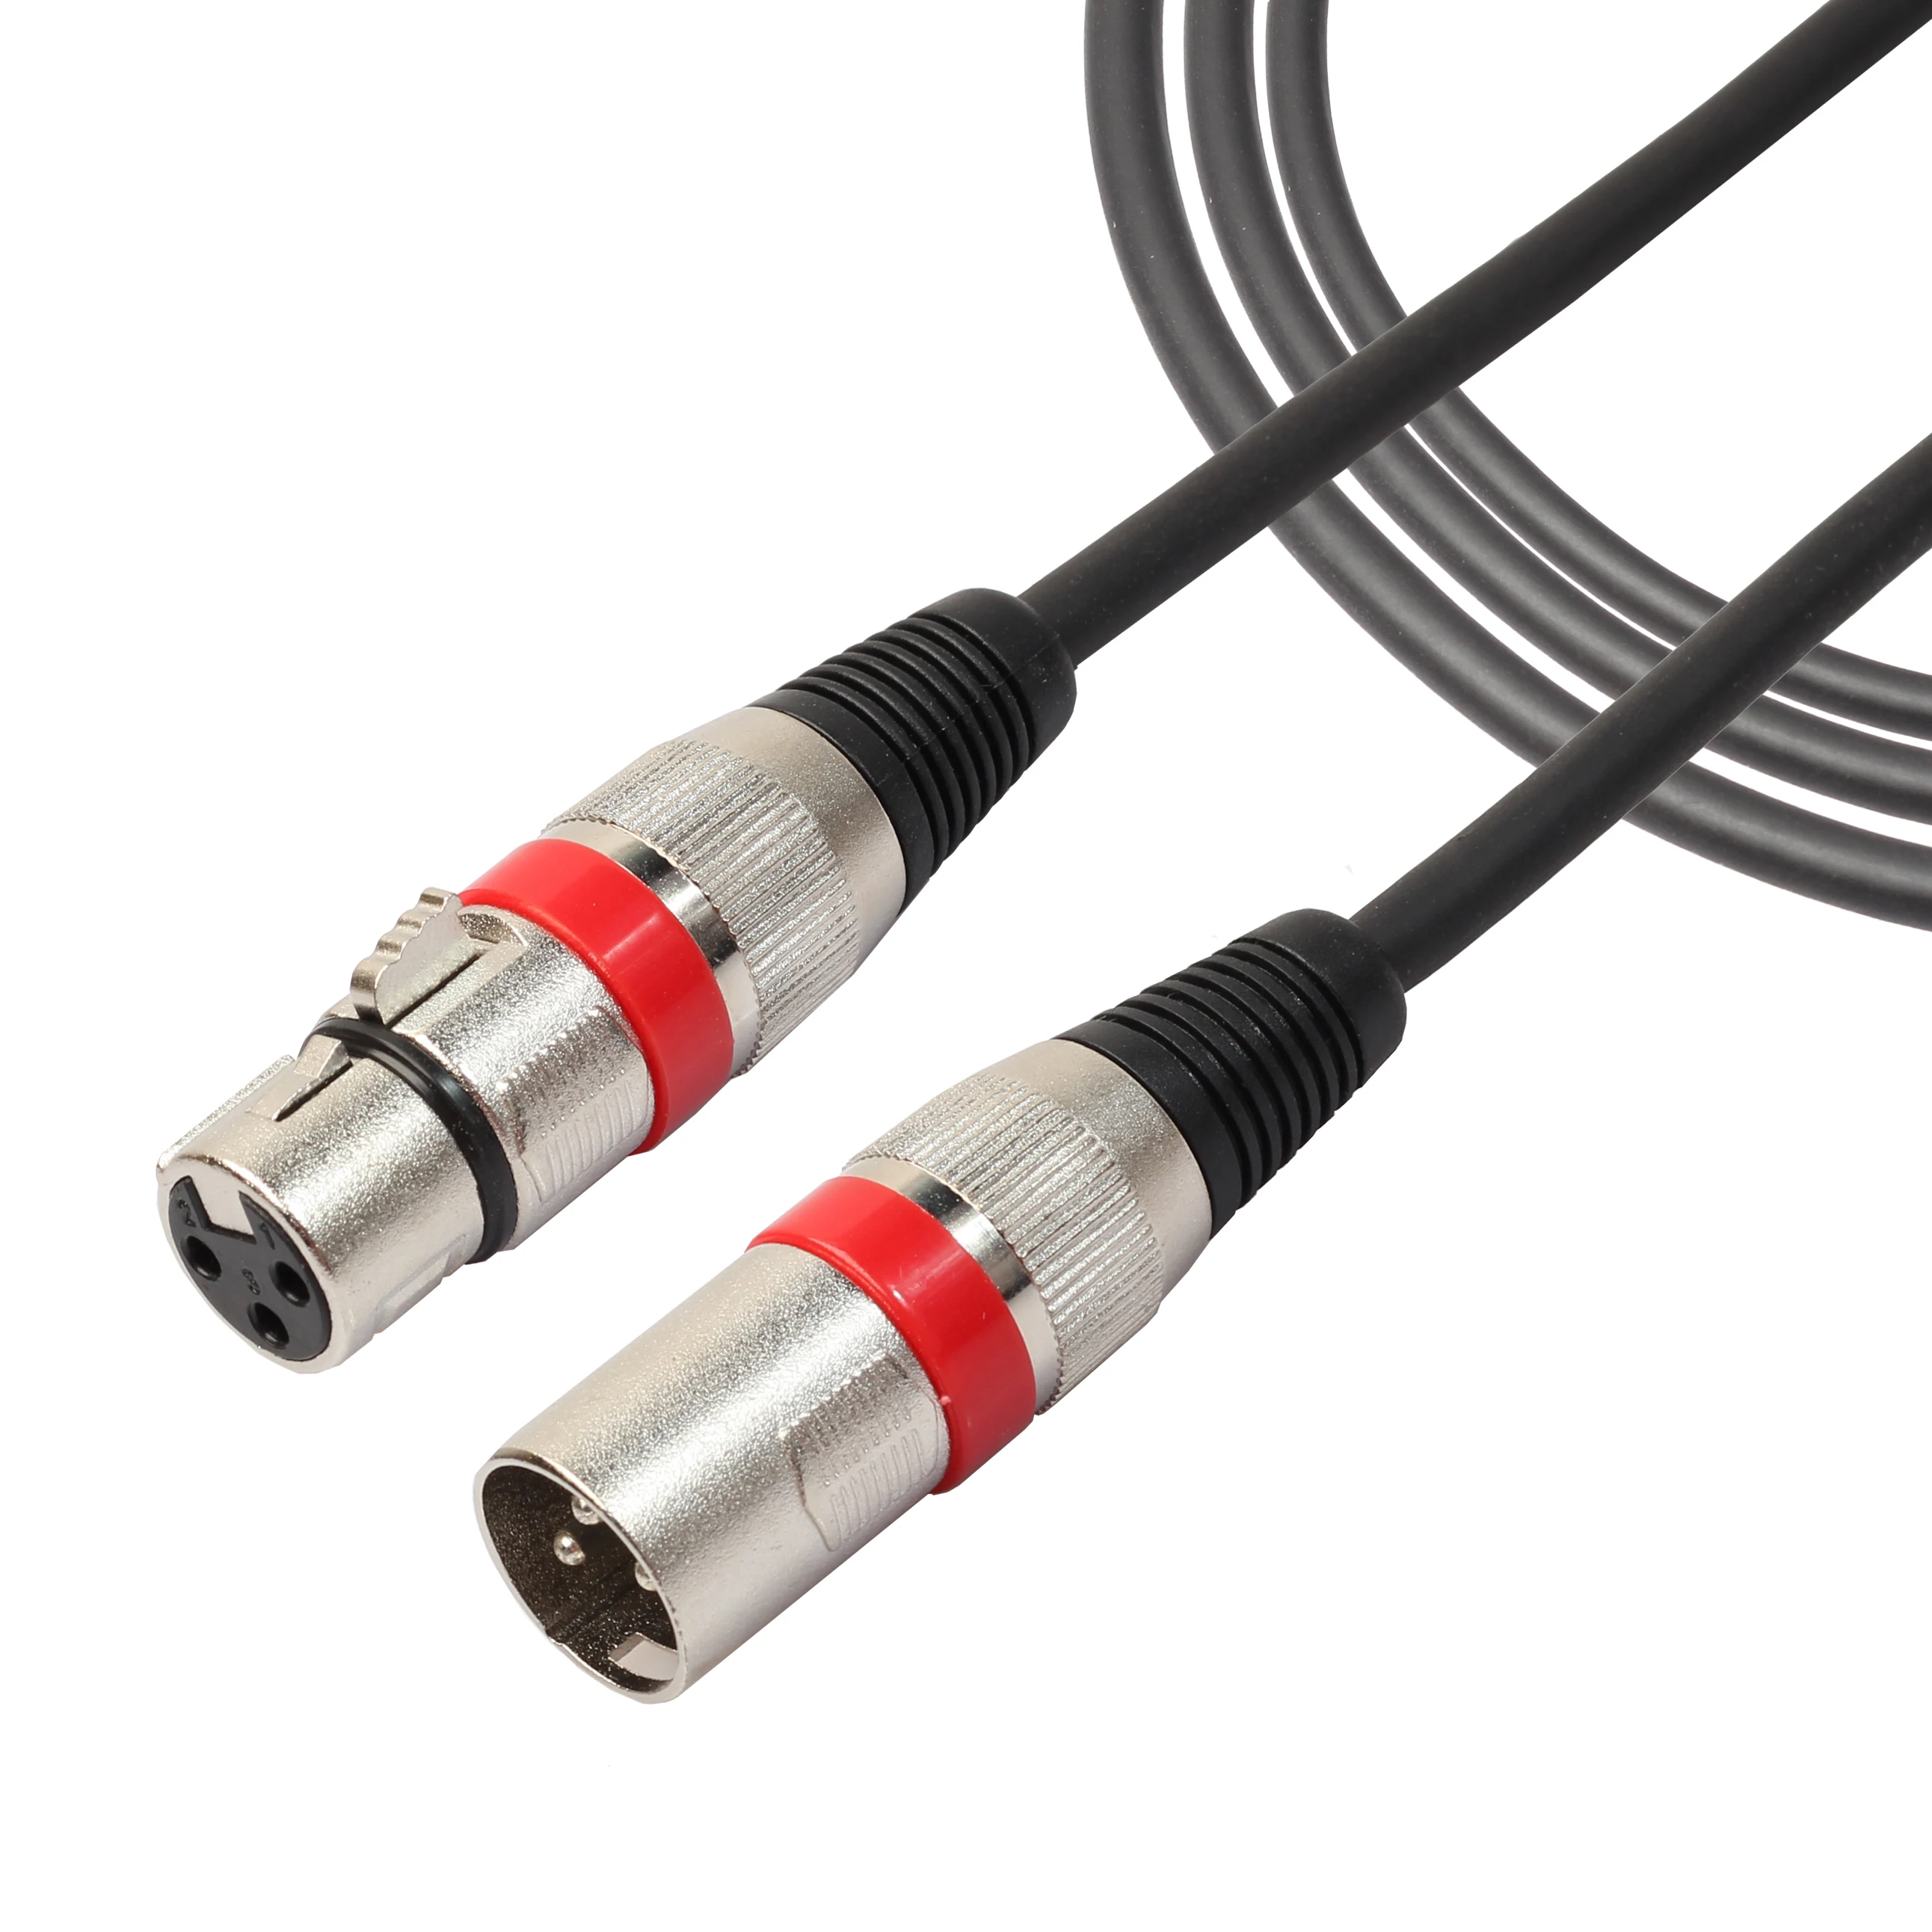 

10Pcs Cannon XLR Cable 1.8m Male To Female Audio Cable for Mic Mixer/Headphone Amplifiers/Stage Lights/Disc Players/Computer